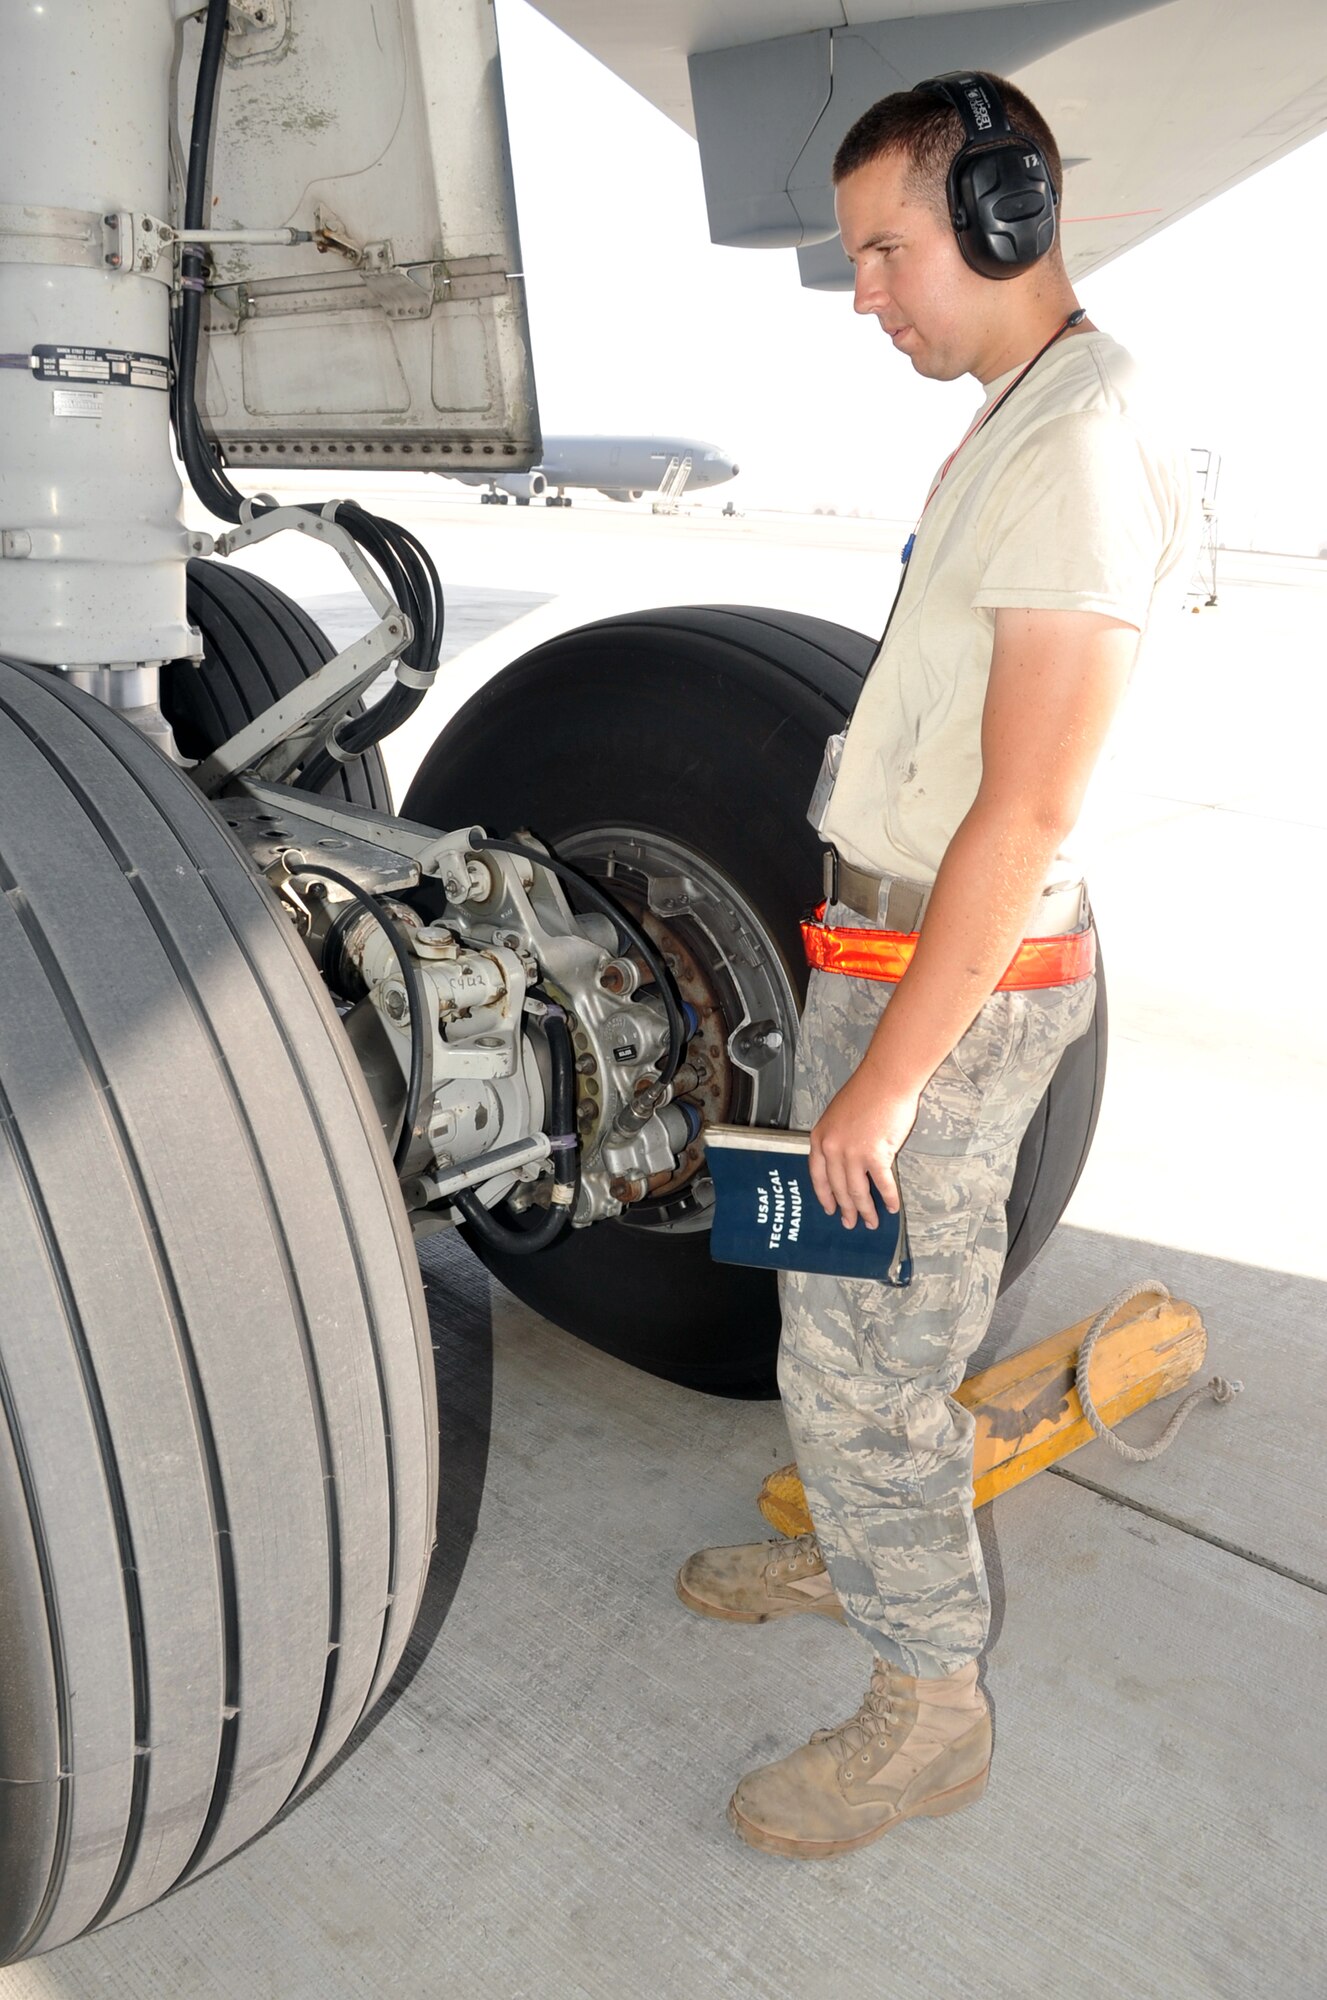 Staff Sgt. Nicholas Shoenhair, KC-10 Extender crew chief with the 380th Expeditionary Aircraft Maintenance Squadron Extender aircraft maintenance unit, looks over landing gear of the KC-10 he's assigned to during operations on the flightline for the 380th Air Expeditionary Wing at a non-disclosed base in Southwest Asia. Sergeant Shoenhair is deployed from the 660th Aircraft Maintenance Squadron at Travis Air Force Base, Calif., and his hometown is Fort Meyers, Fla. (U.S. Air Force Photo/Master Sgt. Scott T. Sturkol/Released)